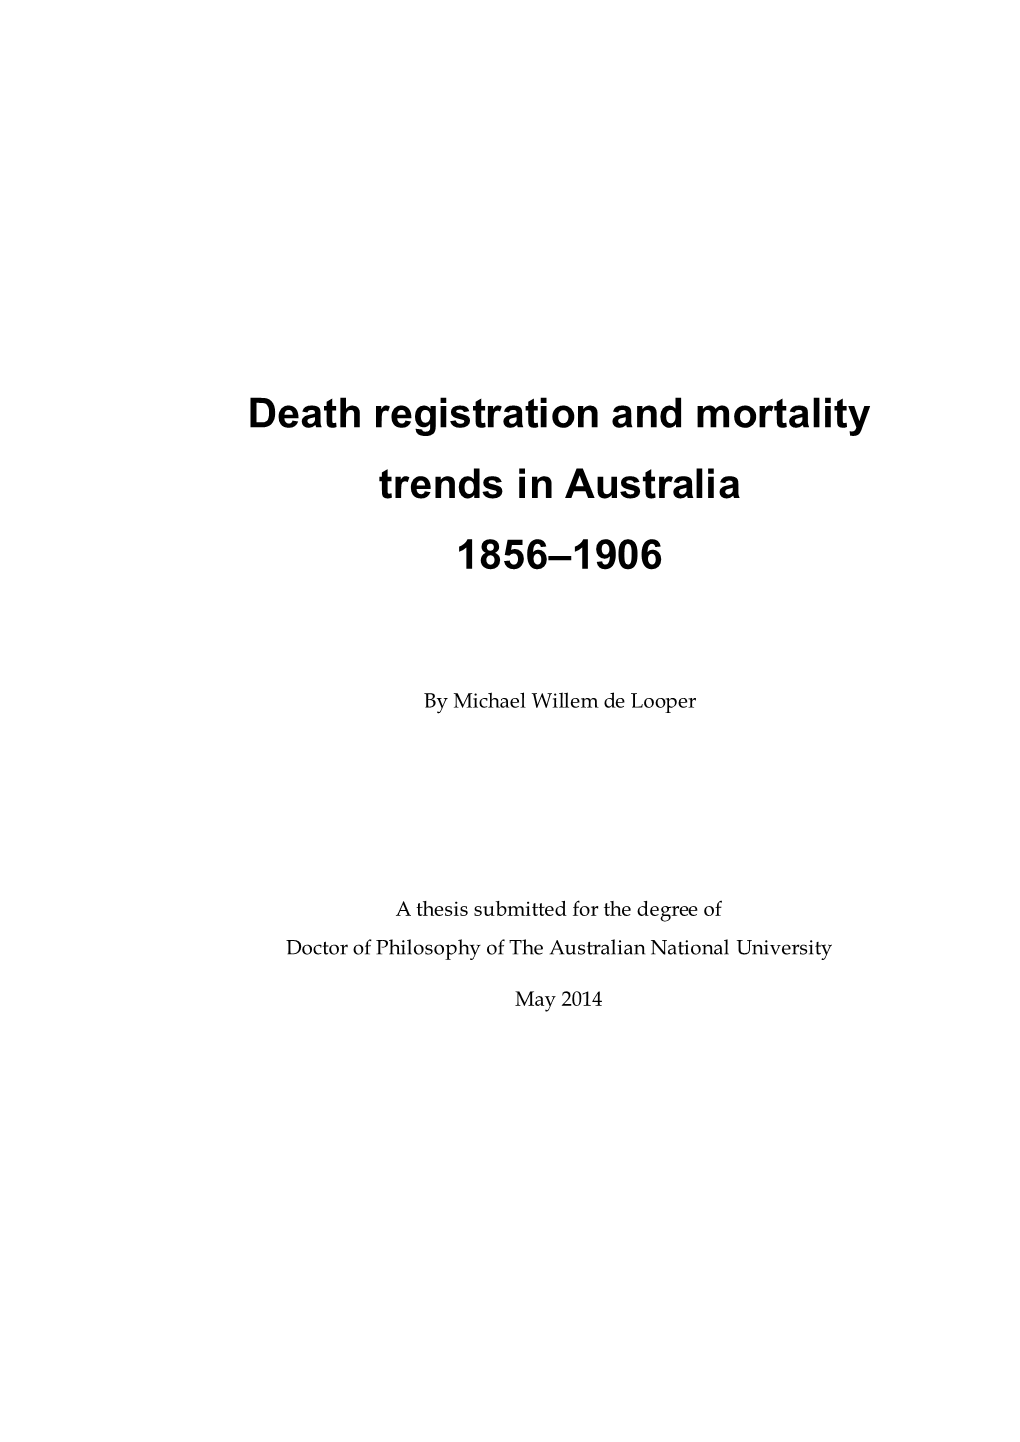 Death Registration and Mortality Trends in Australia 1856–1906